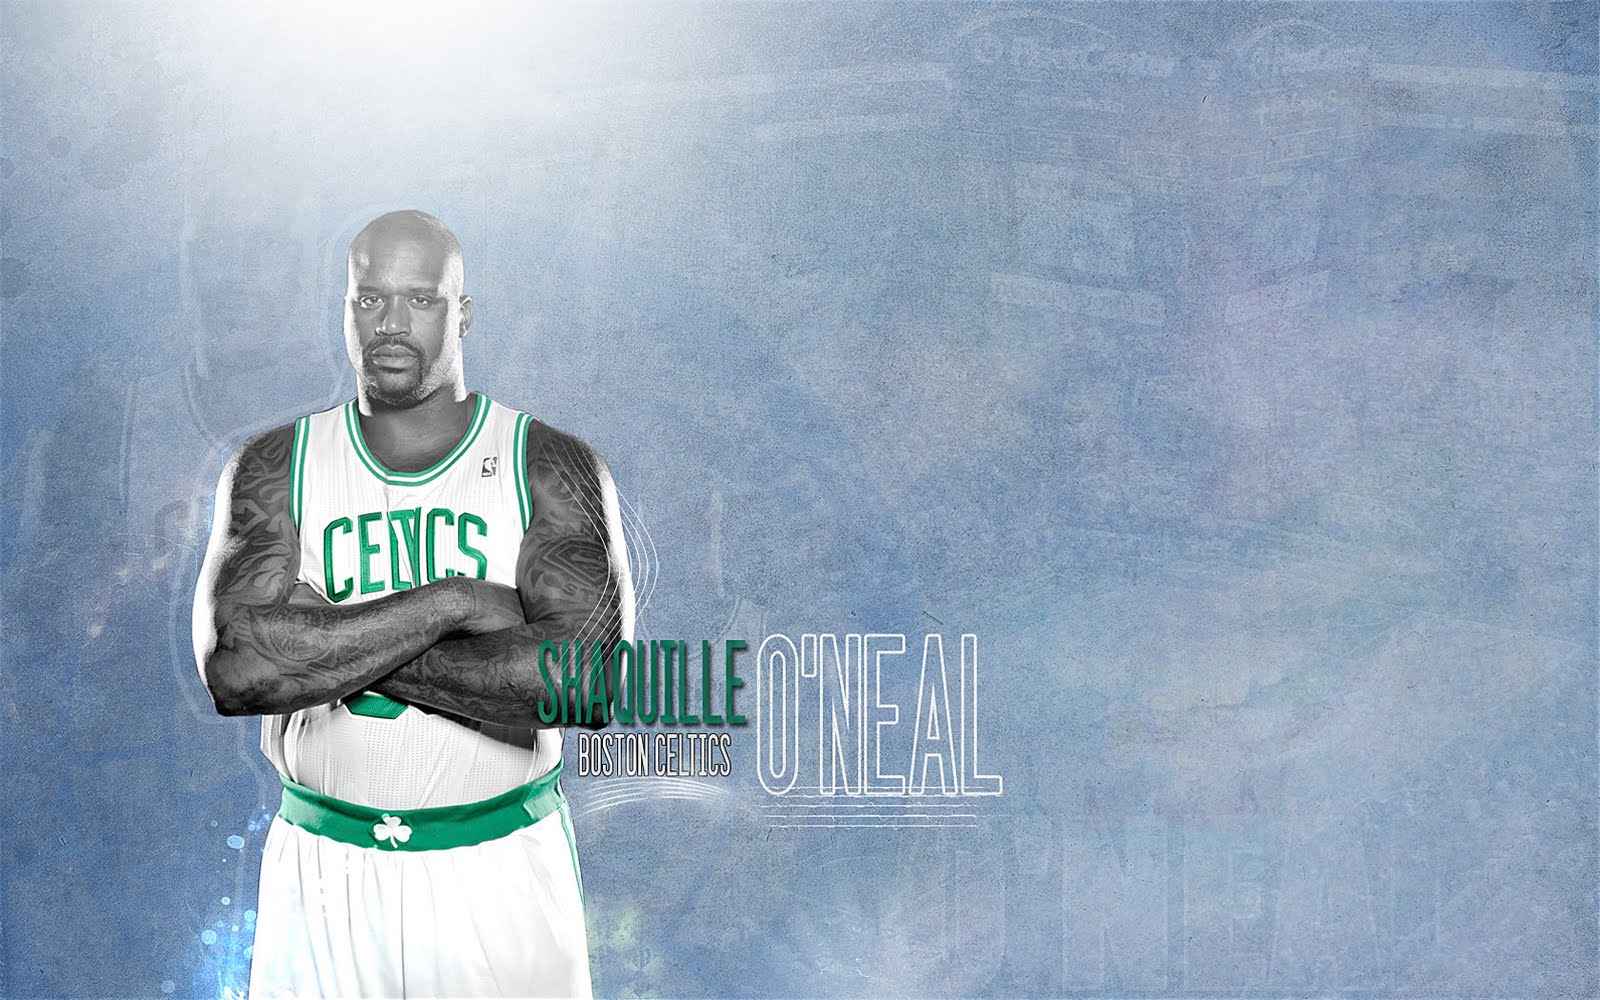 Shaquille O'Neal Professional Basketball Player : Basketball Legend Wallpapers ...1600 x 1000